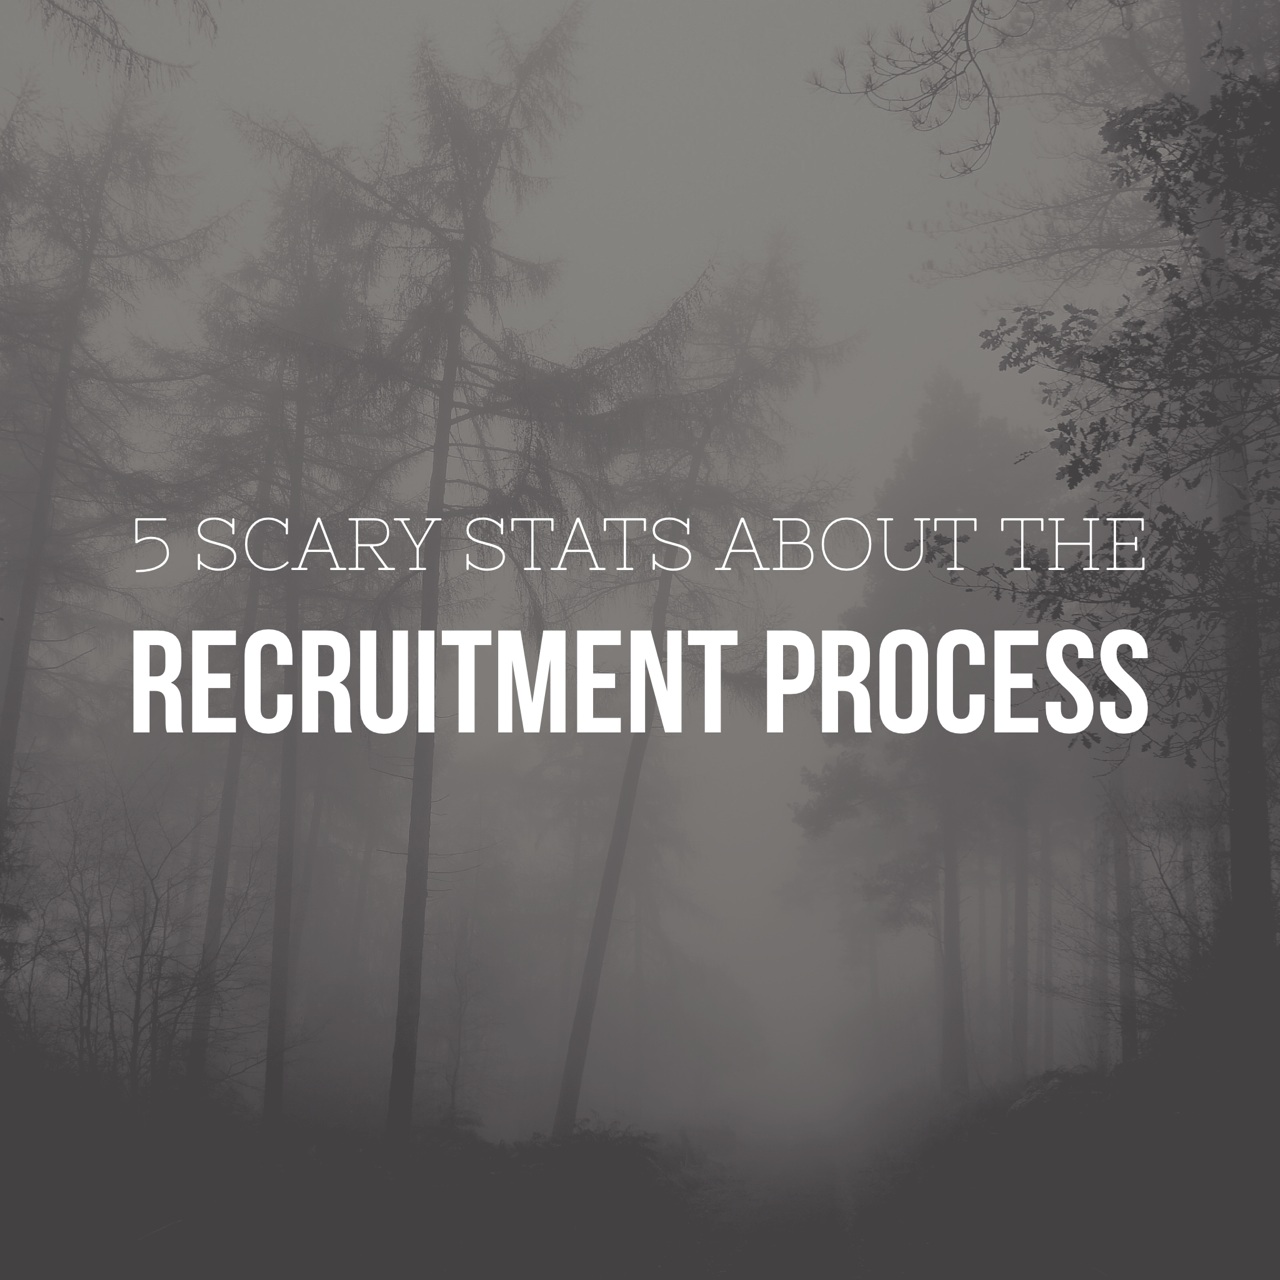 5 Scary Stats About the Recruitment Process [Infographic]